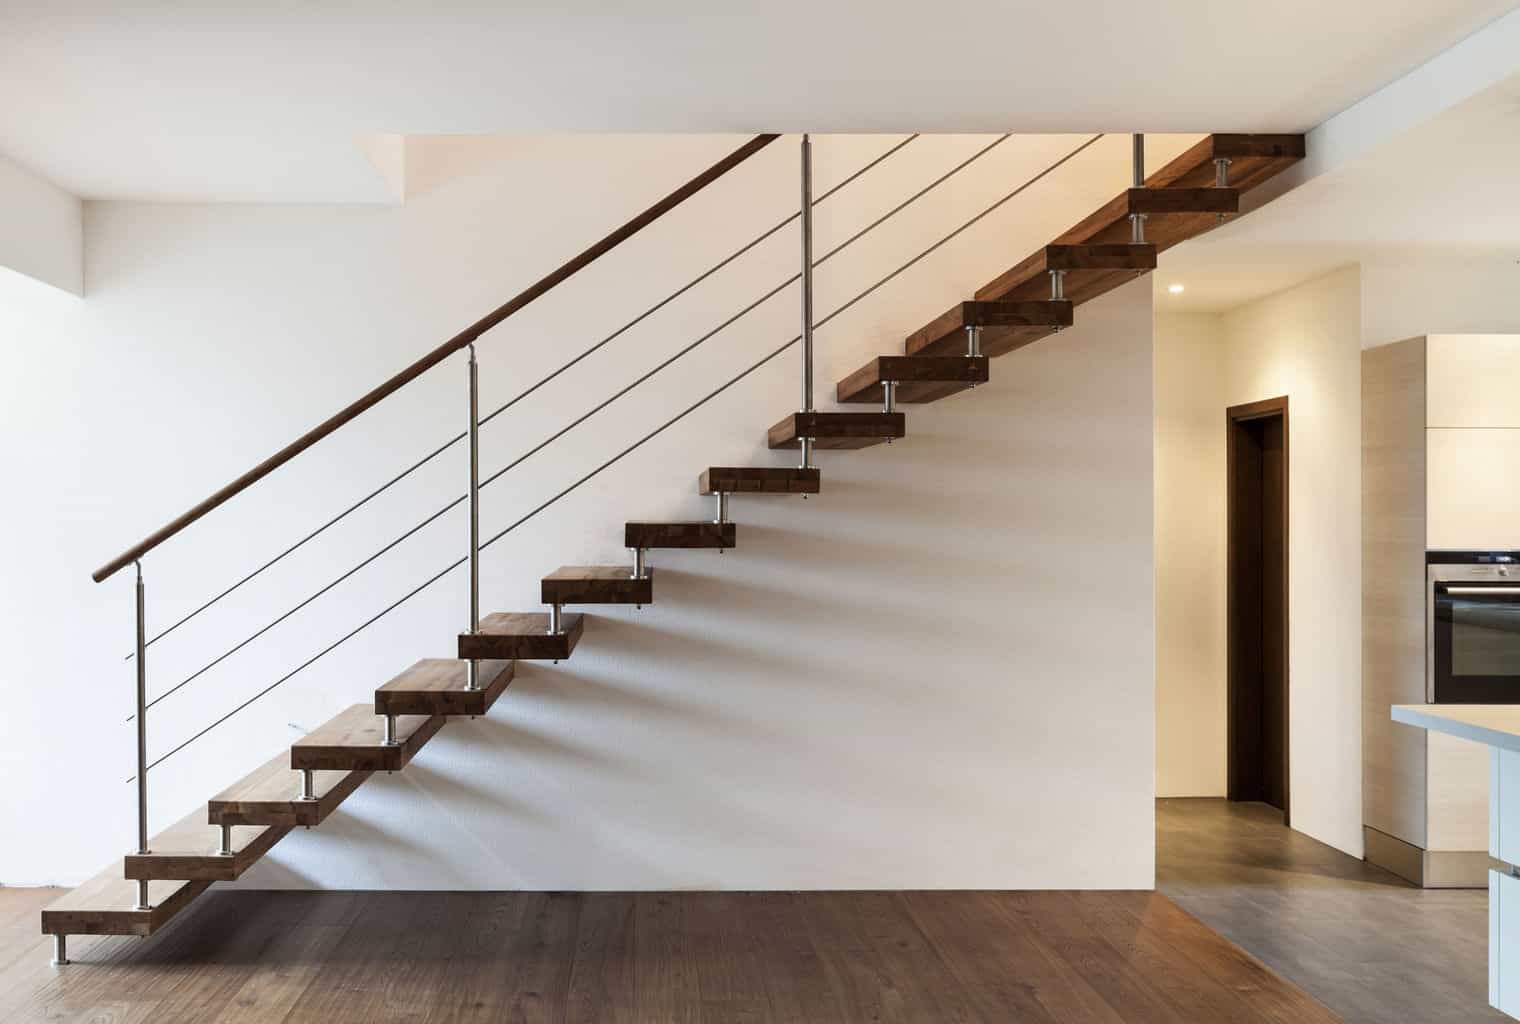 5 Reasons You Should Install Laminate Flooring On Stairs The Flooring Lady